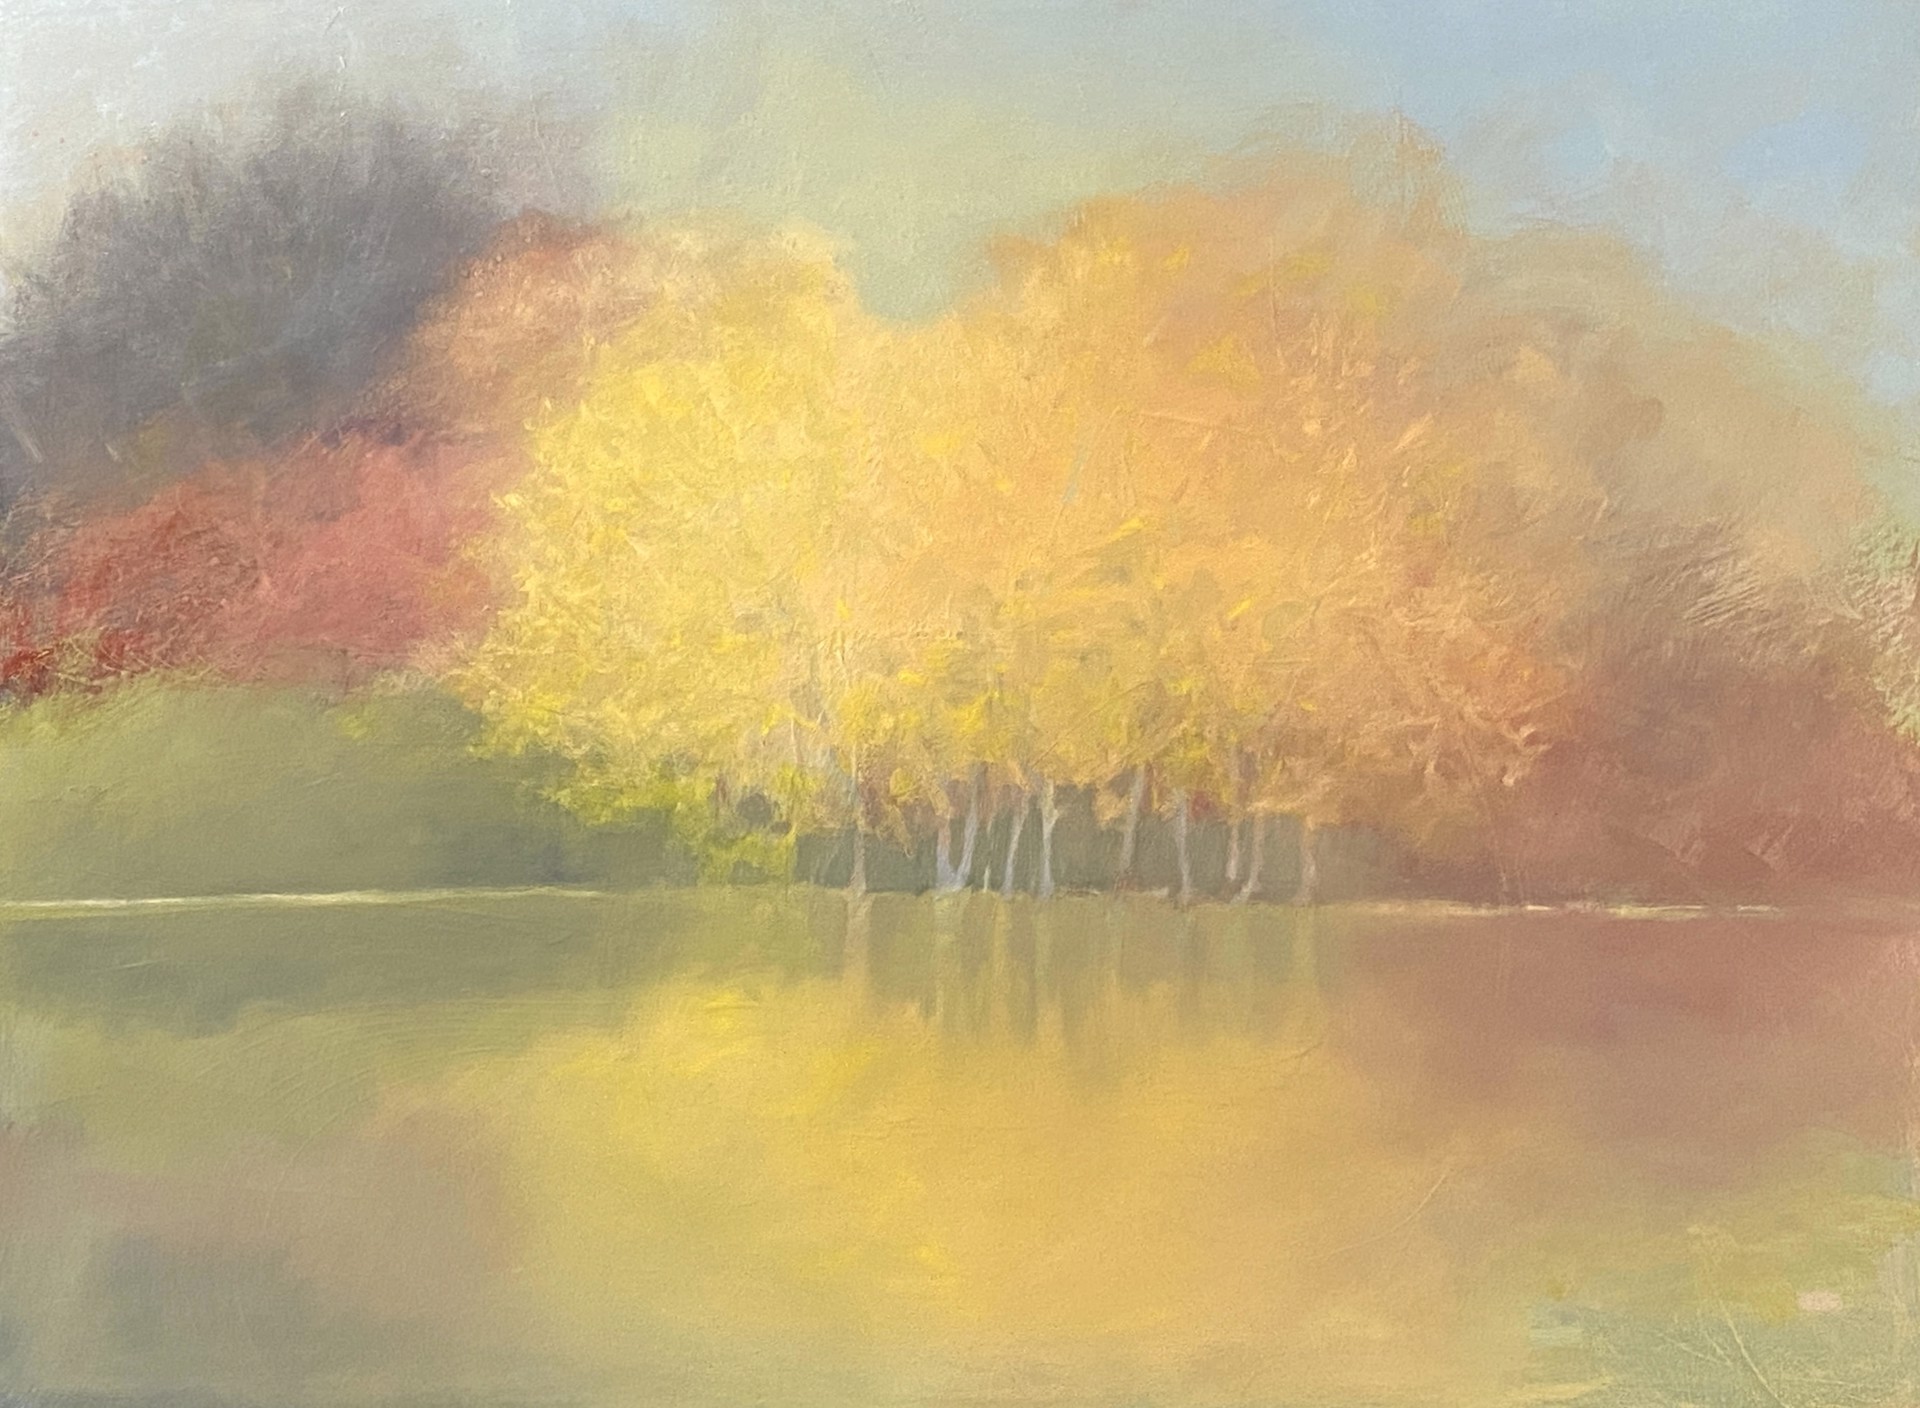 Warm Reflections by Pam Hassler